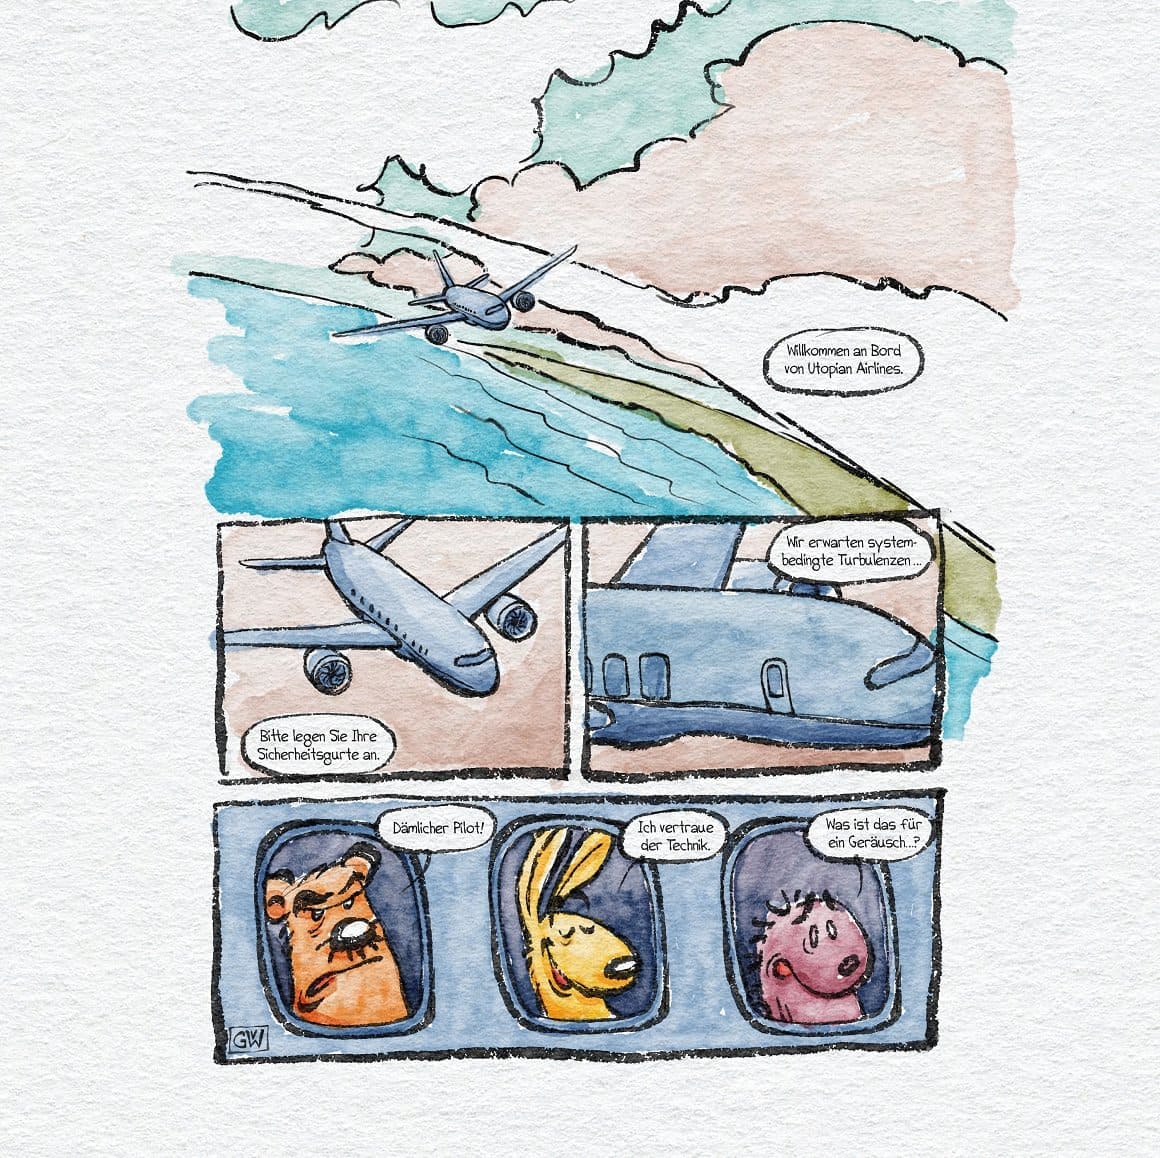 Watercolor comic about a plane and passengers.